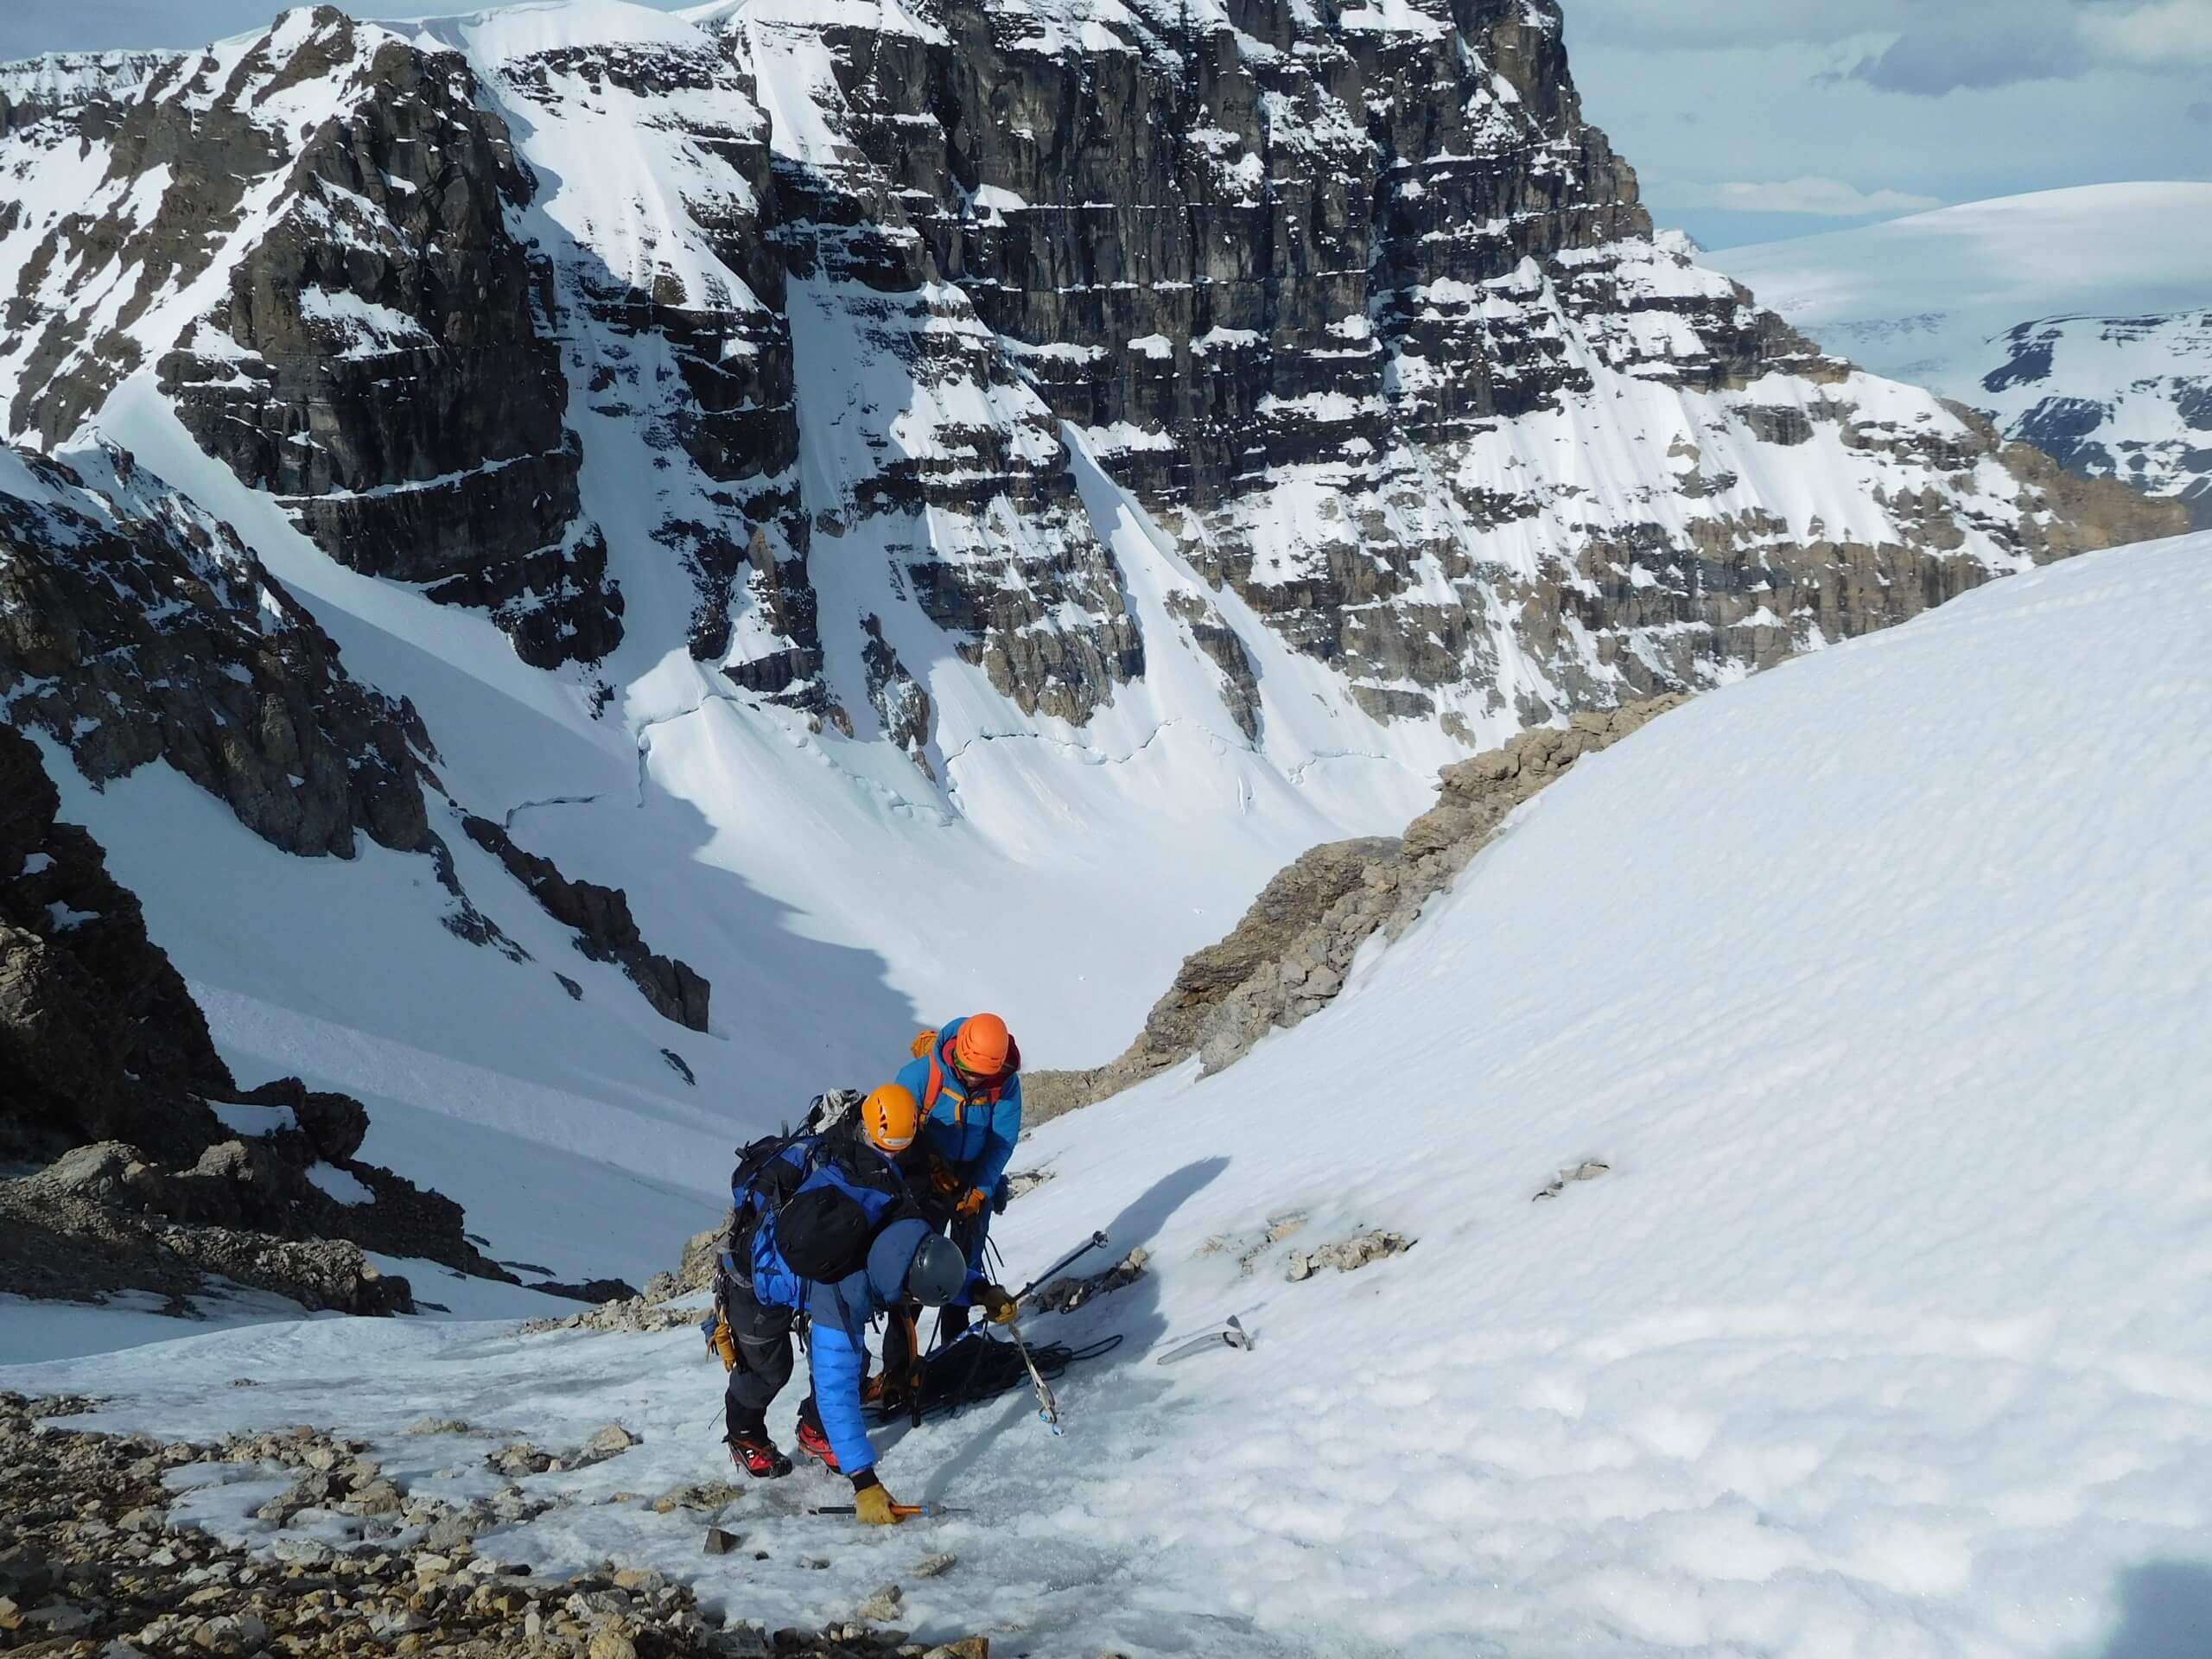 Ascending the slipery slope while on a training course in the Canadian Rockies